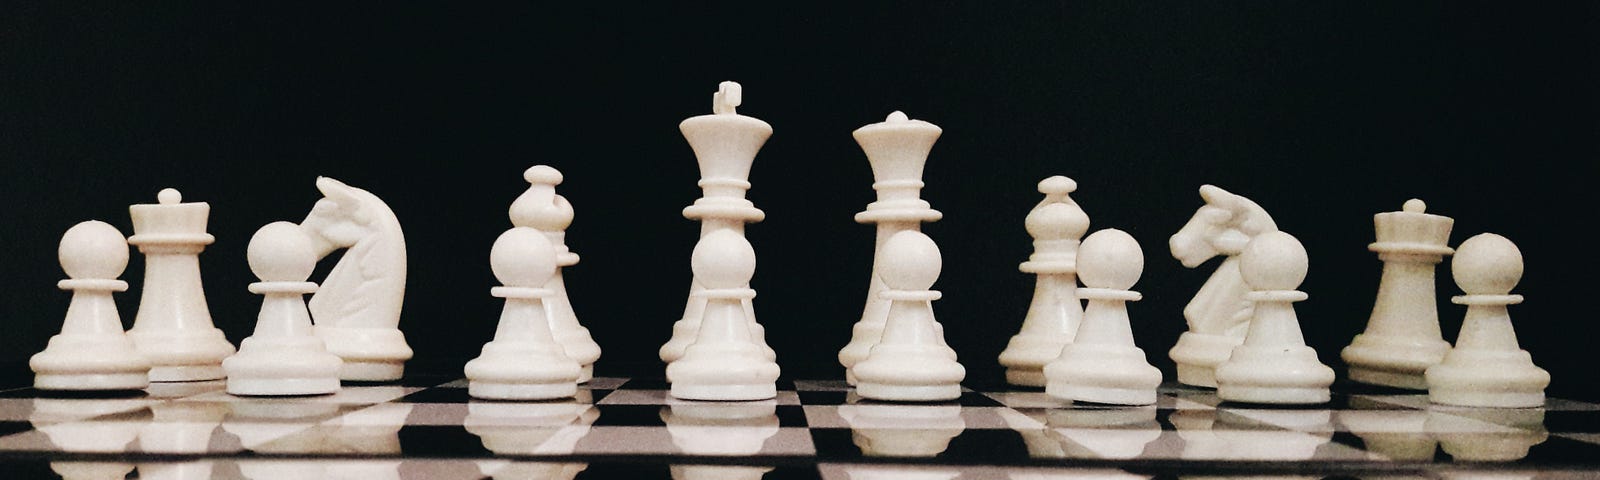 AlphaZero Chess: How It Works, What Sets It Apart, and What It Can Tell Us, by Maxim Khovanskiy